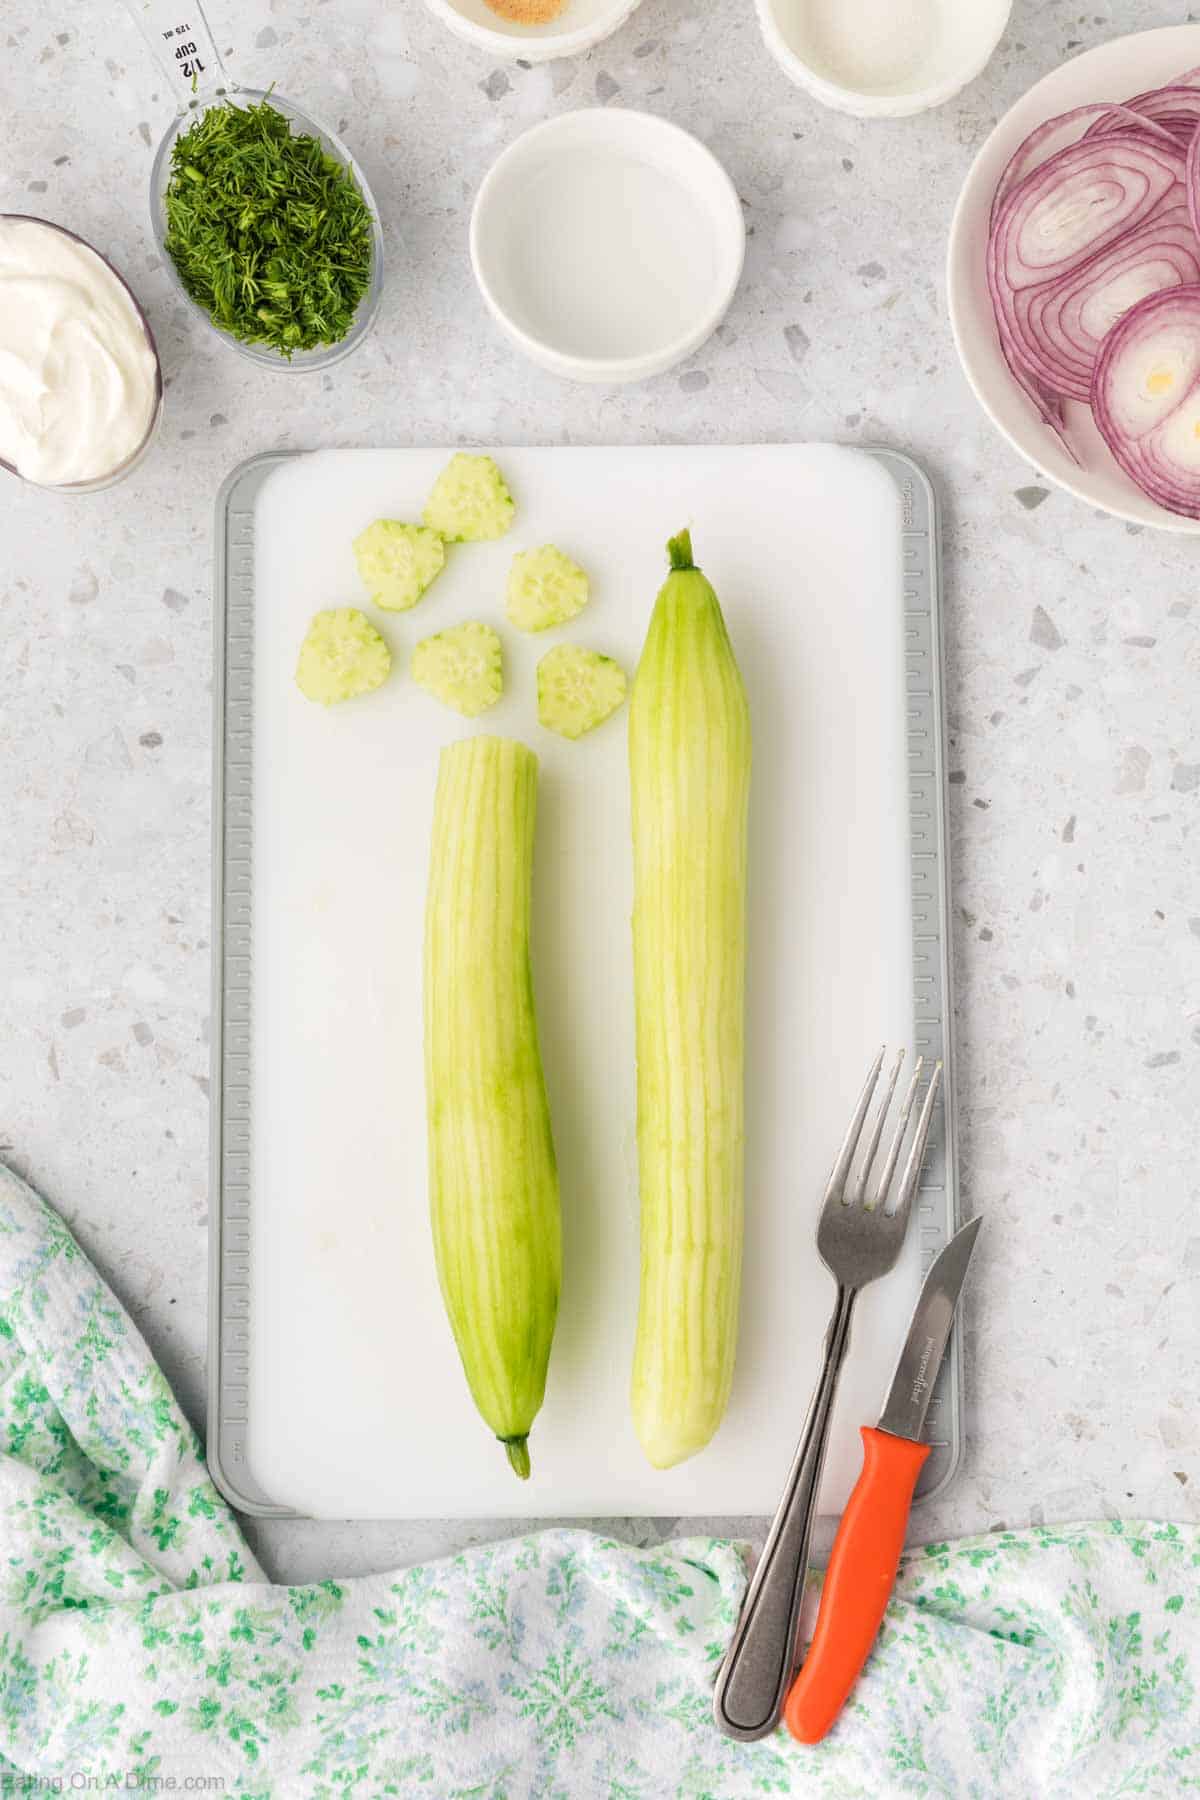 Peeling the cucumber and placing on a cutting board 